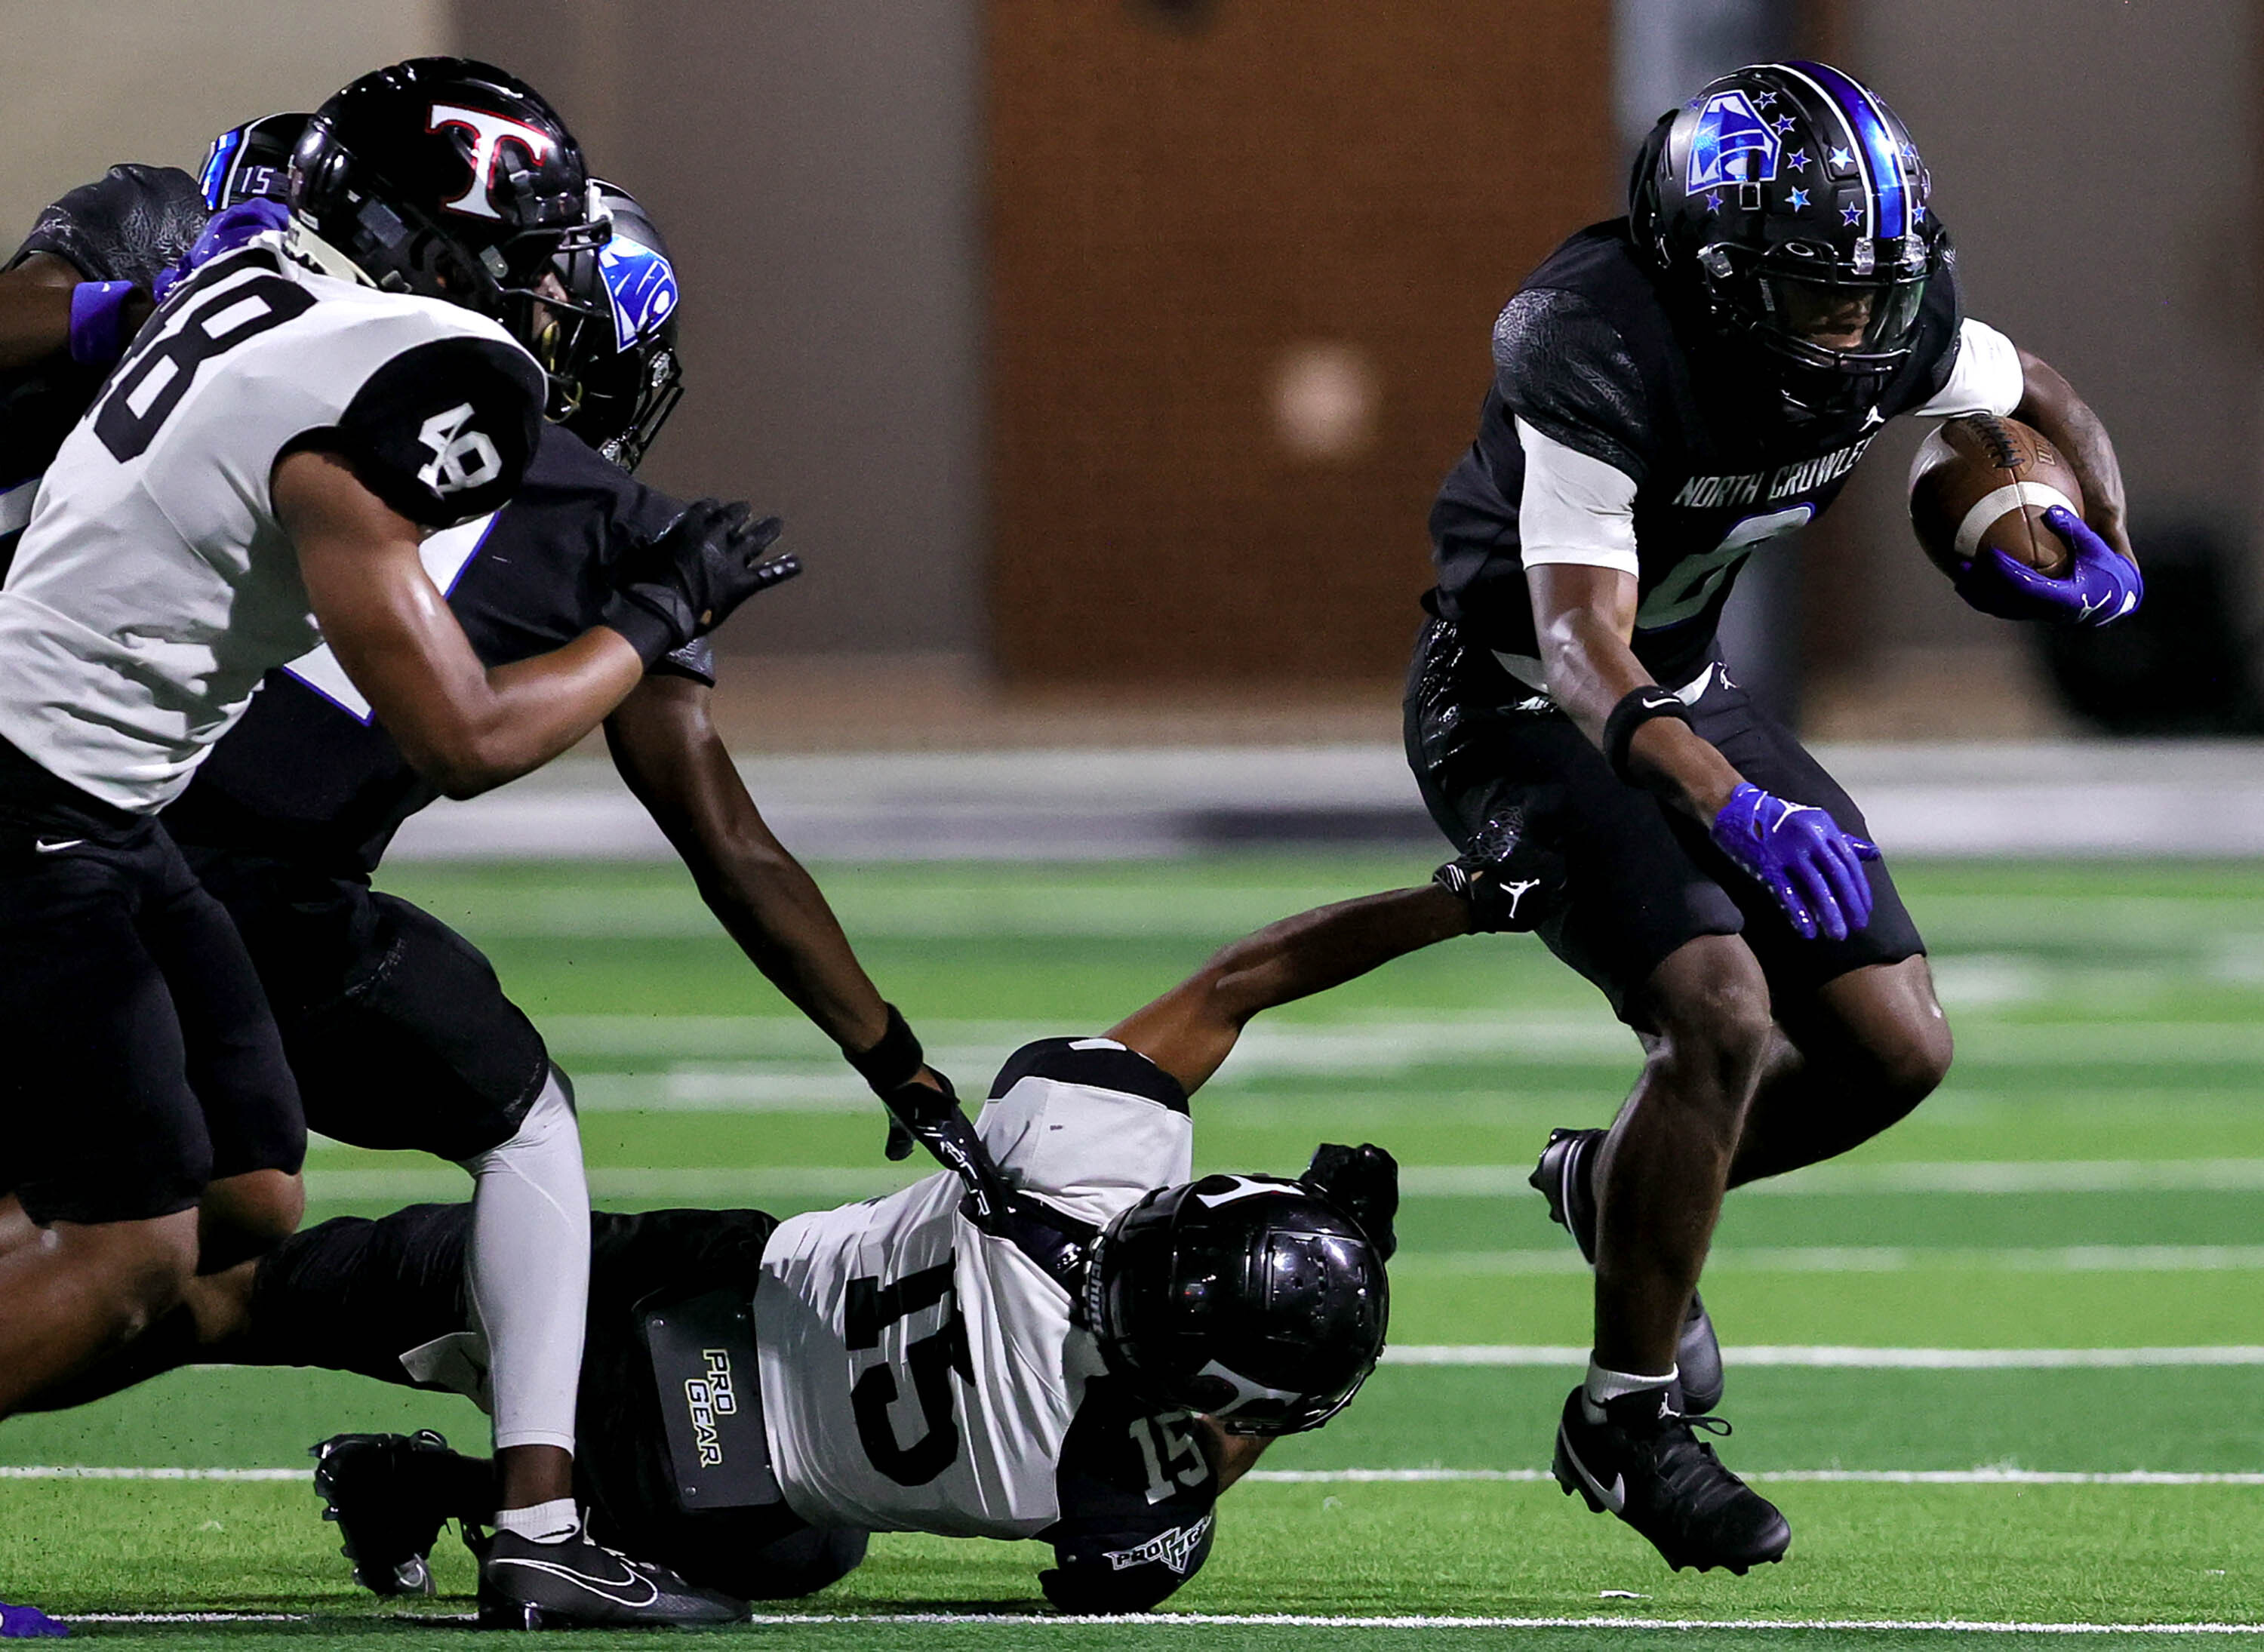 See photos of Euless Trinity's dominant win over Crowley